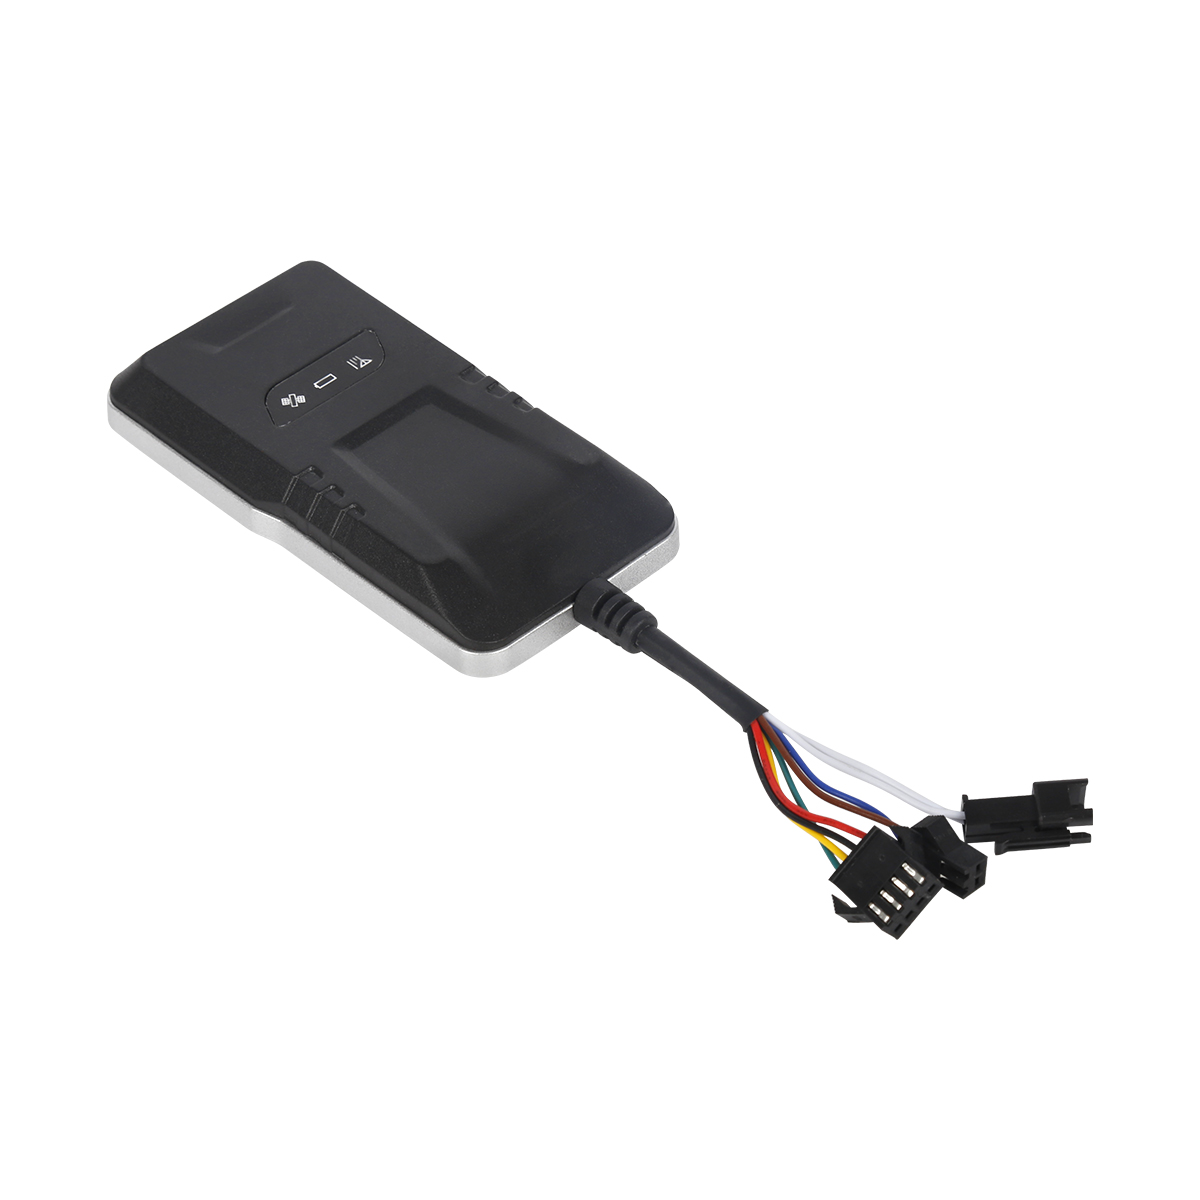 gps tracker no monthly fee